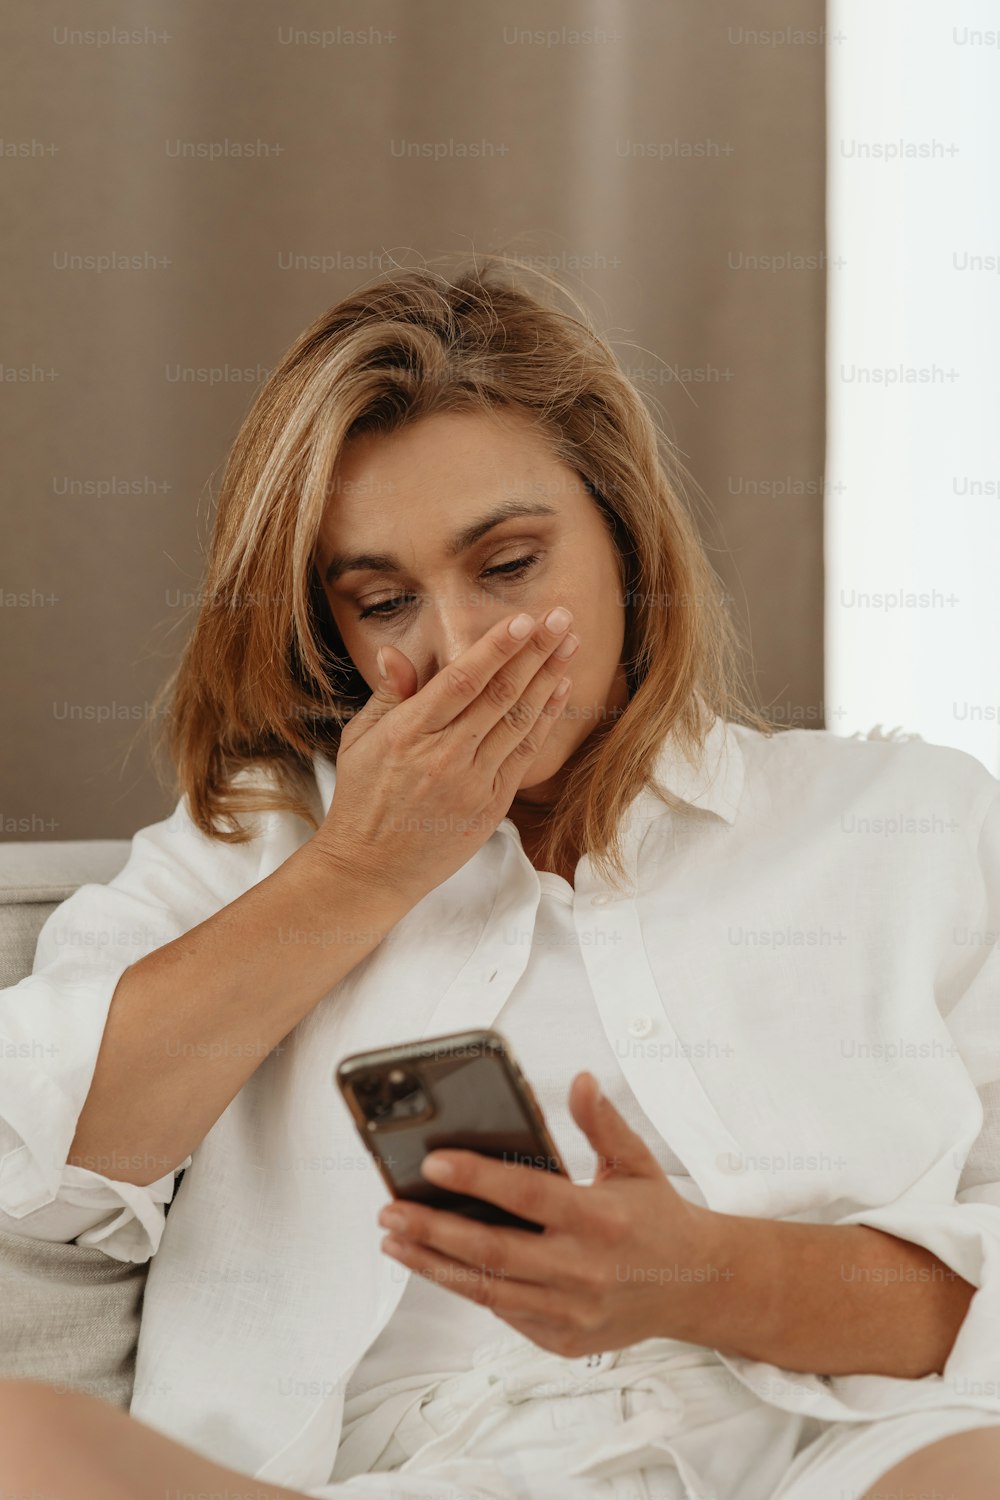 a woman sitting on a couch looking at a cell phone